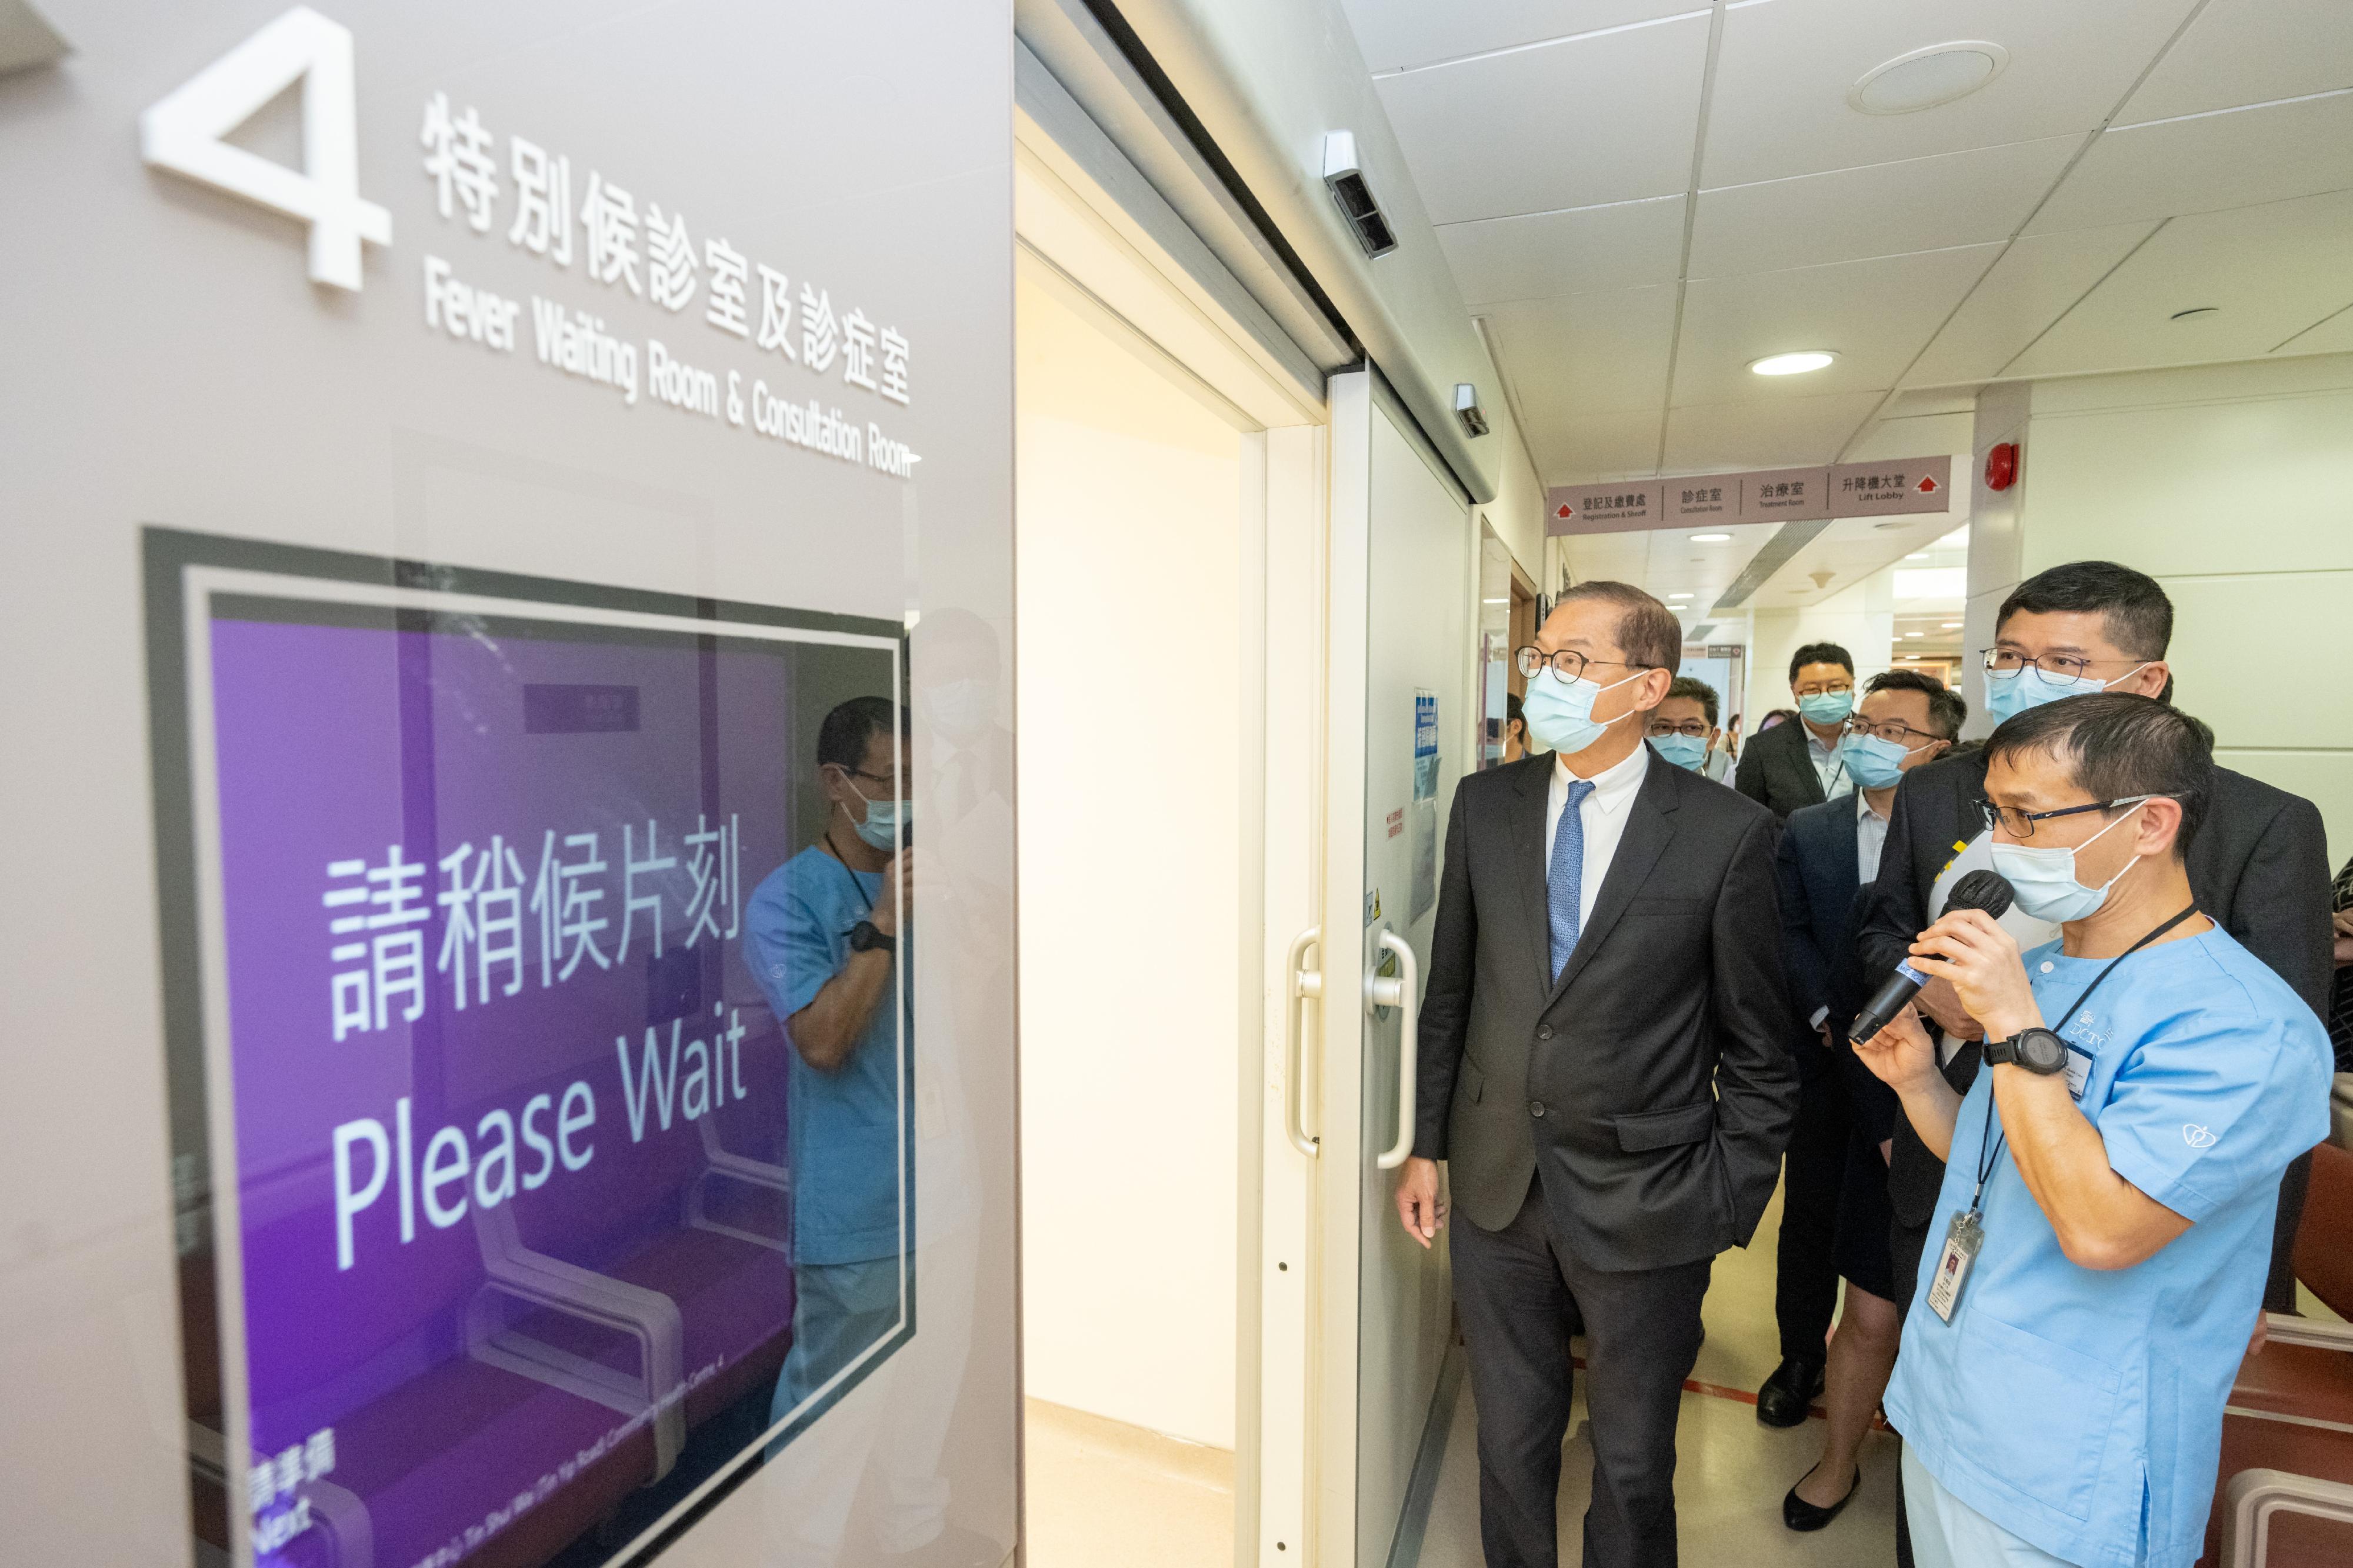 The Secretary for Health, Professor Lo Chung-mau (left), visits the Tin Shui Wai (Tin Yip Road) Community Health Centre today (July 20) and tours the general out-patient fever waiting room and consultation room, while receiving a briefing by a healthcare staff member on the relevant services.